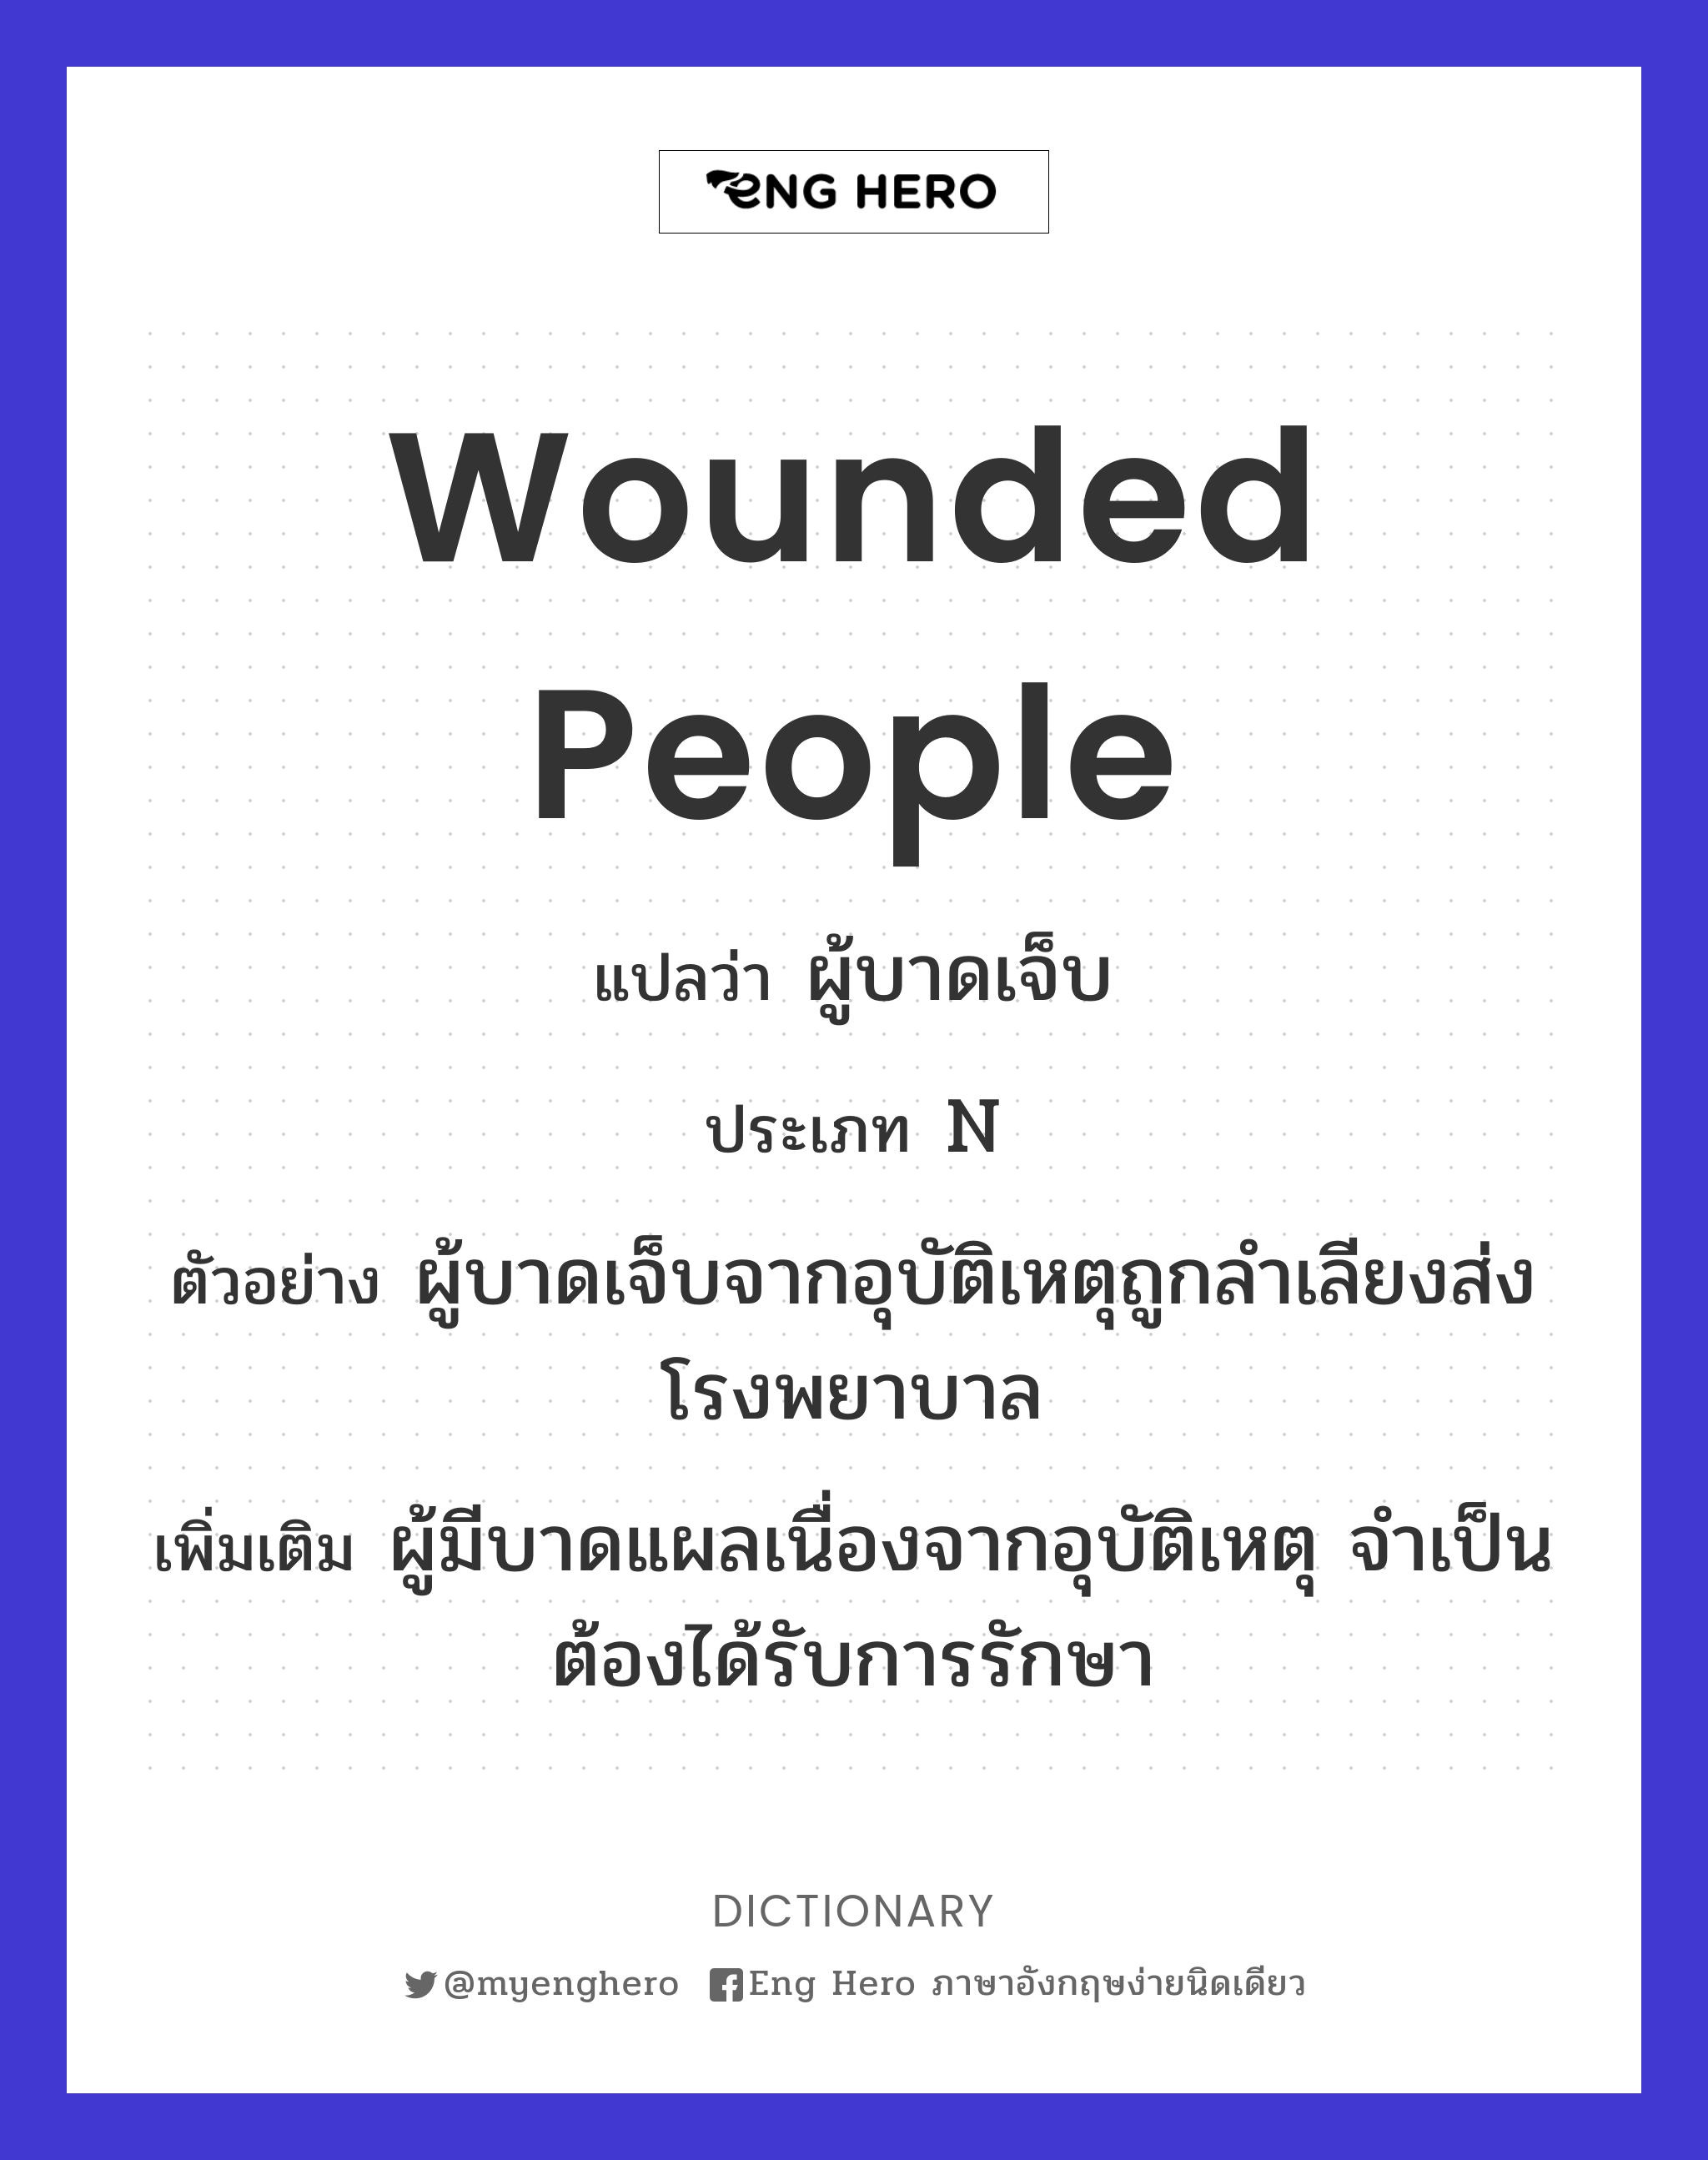 wounded people